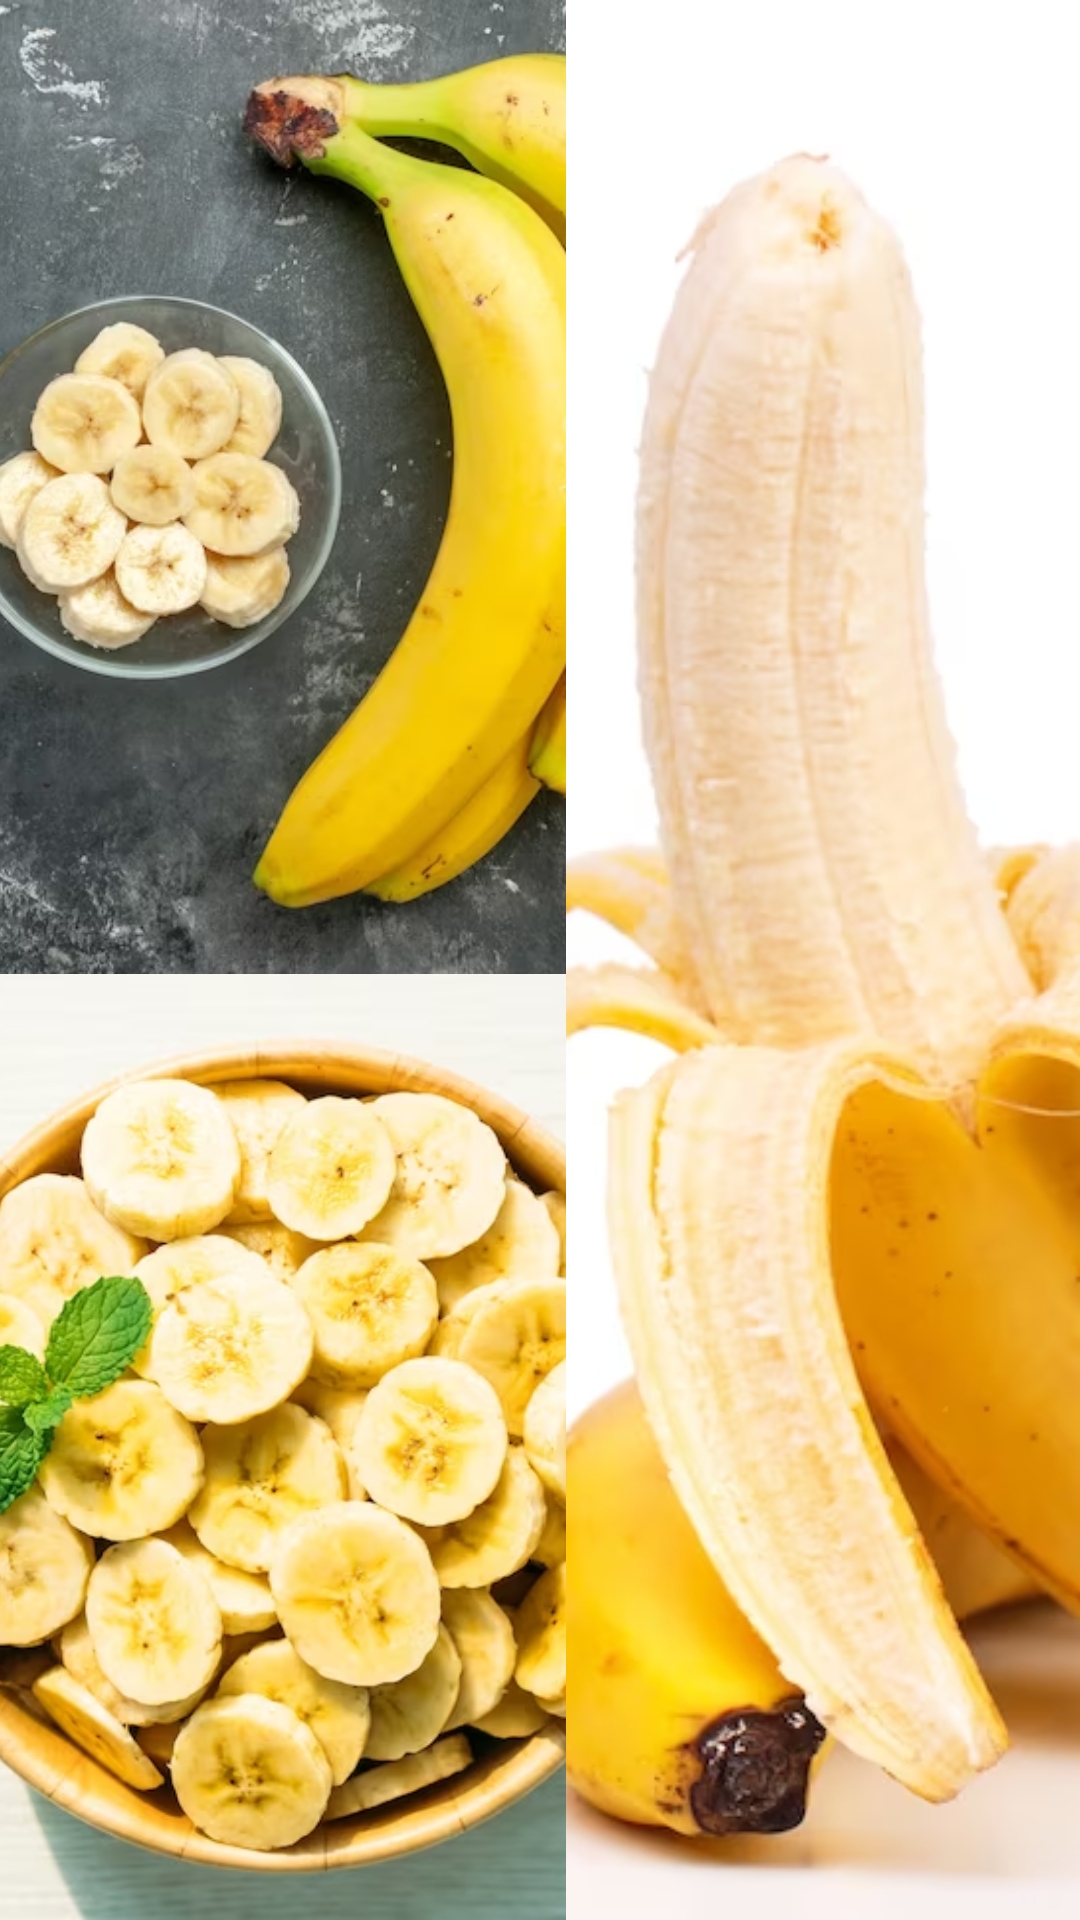 Do you love bananas? Look at how it is benefitting your health this summer 